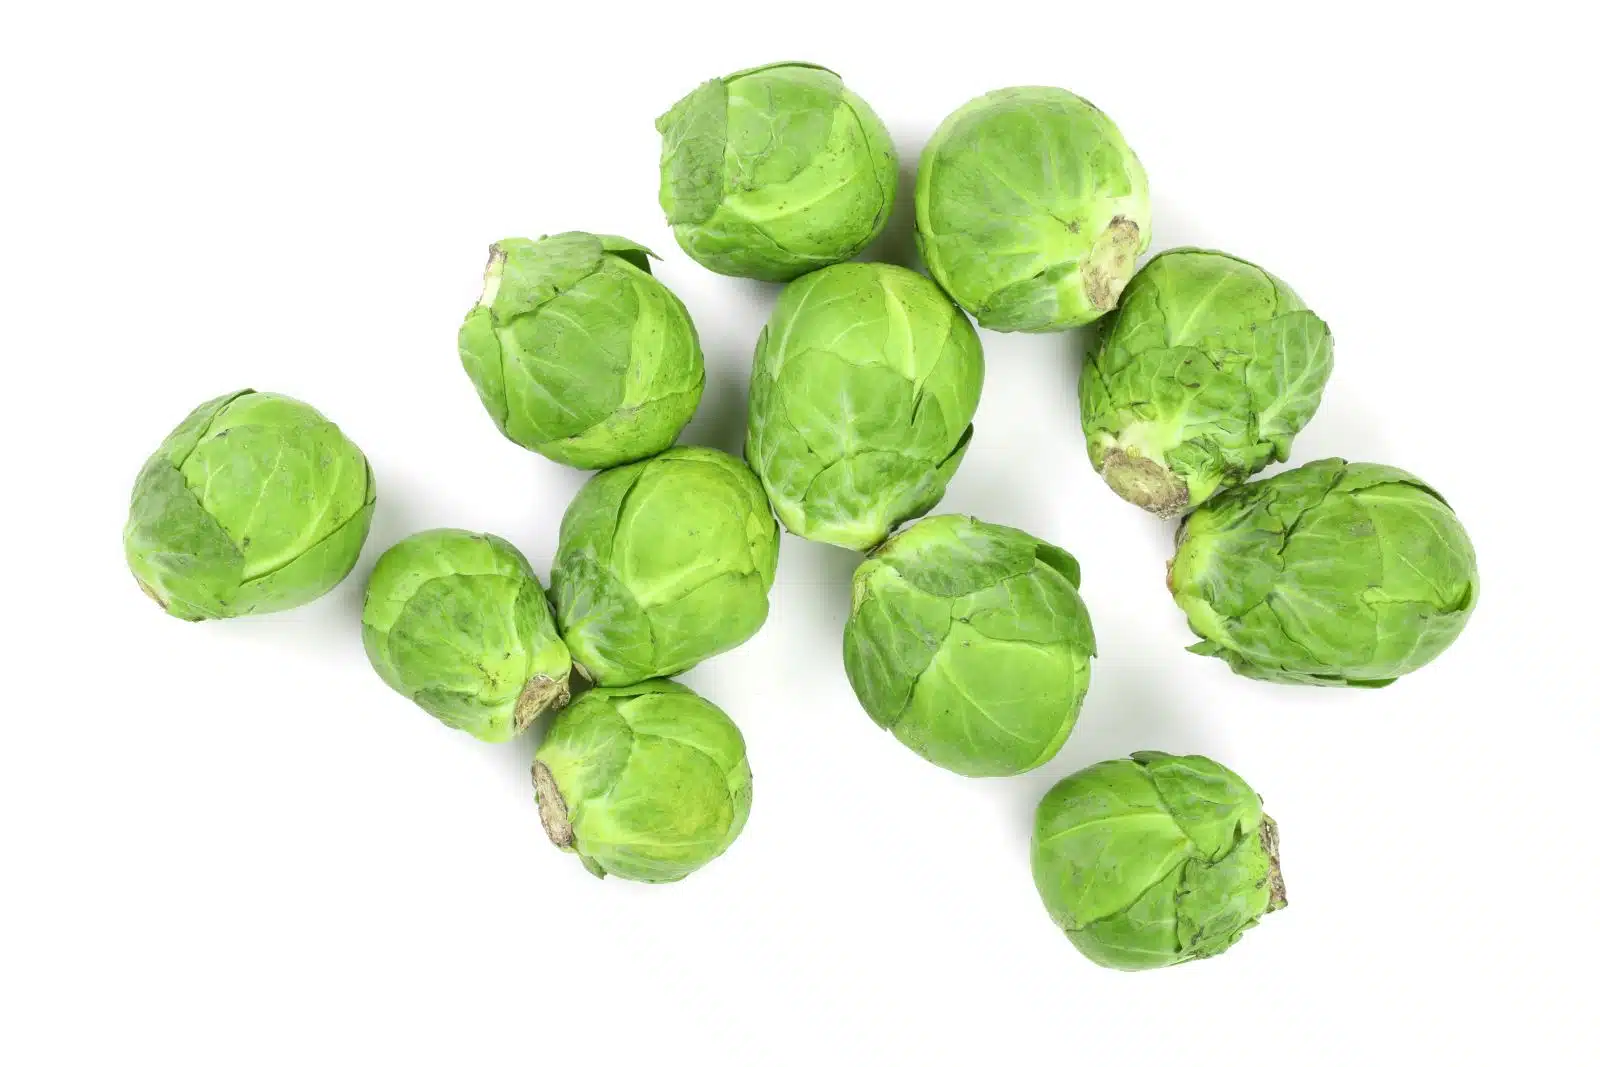 Brussel Sprouts Love or Hate Depositphotos 189103596 XL